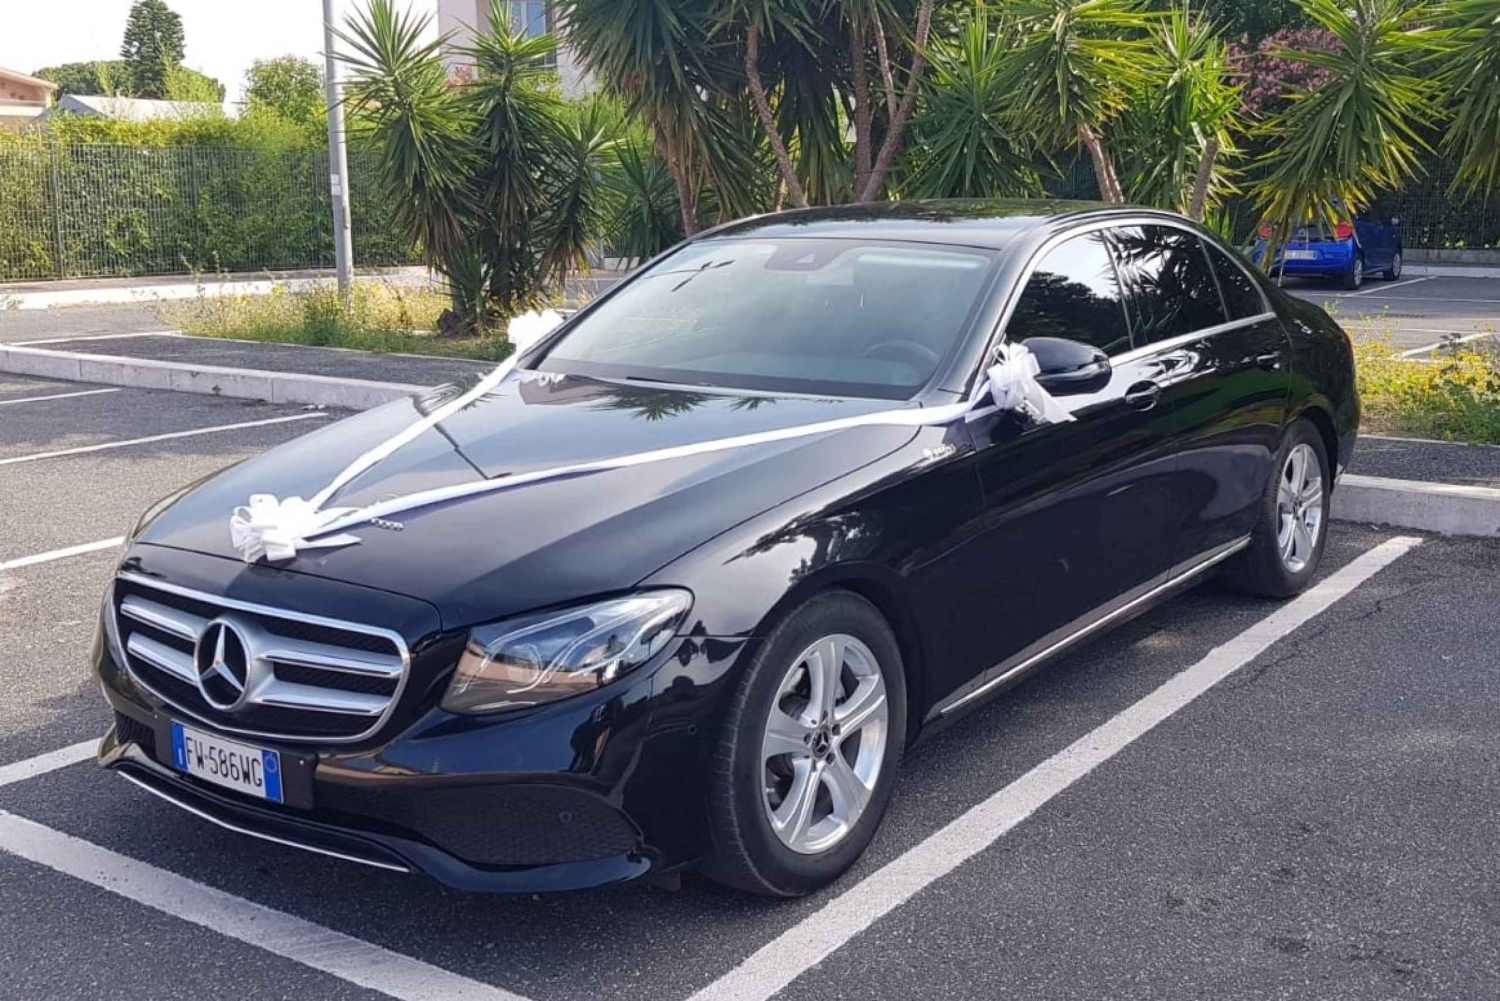 Luxury private transfer Linate airport to Malpensa airport